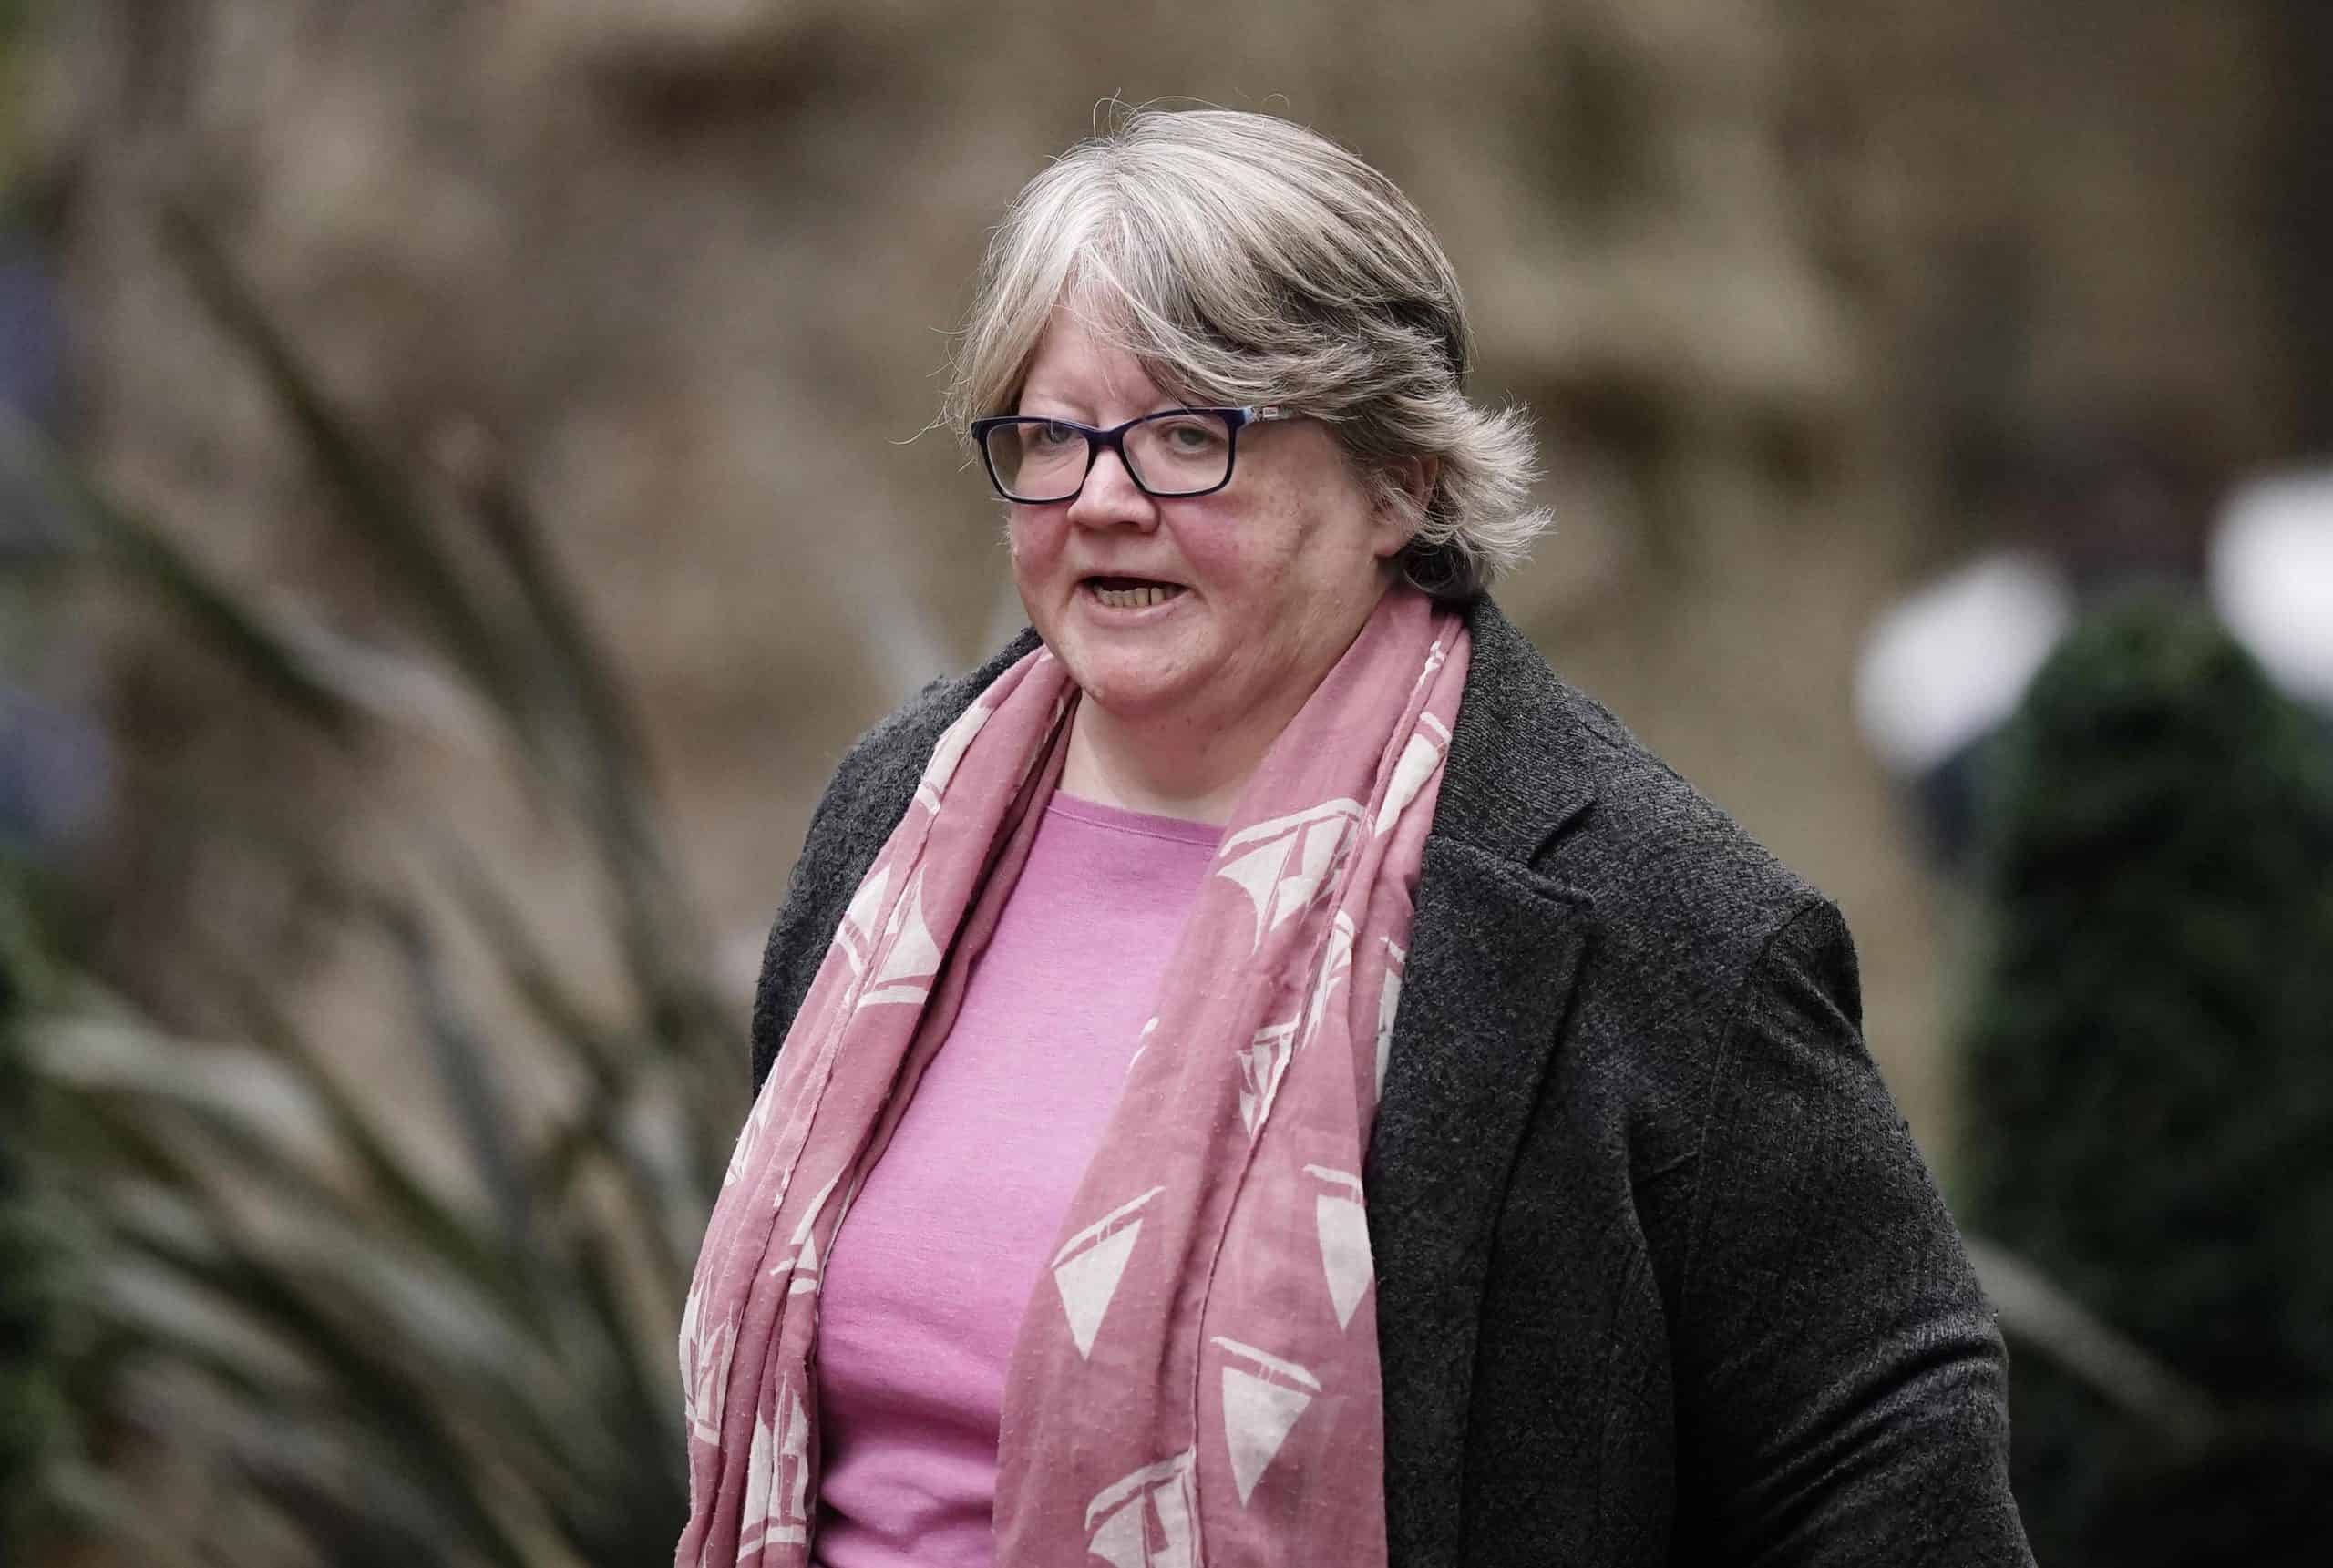 ‘Super patronising’ Therese Coffey slammed over Health Department email